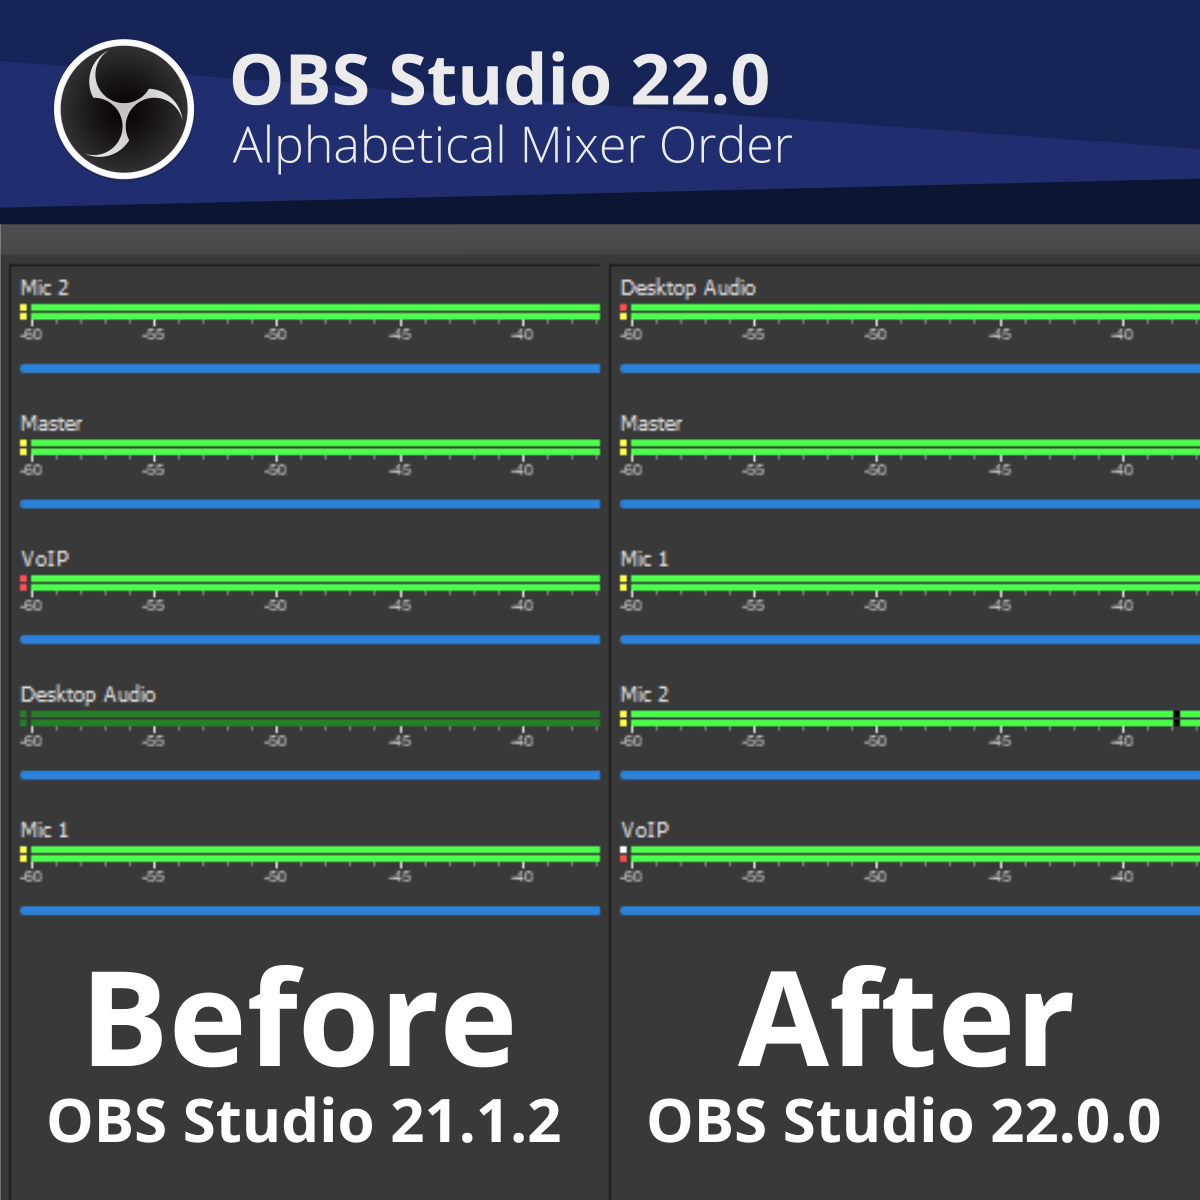 OBS on Twitter: "Additionally, sources are now sorted alphabetically instead of randomly changing their order each OBS launches. This also pairs with the ability to rename audio sources,